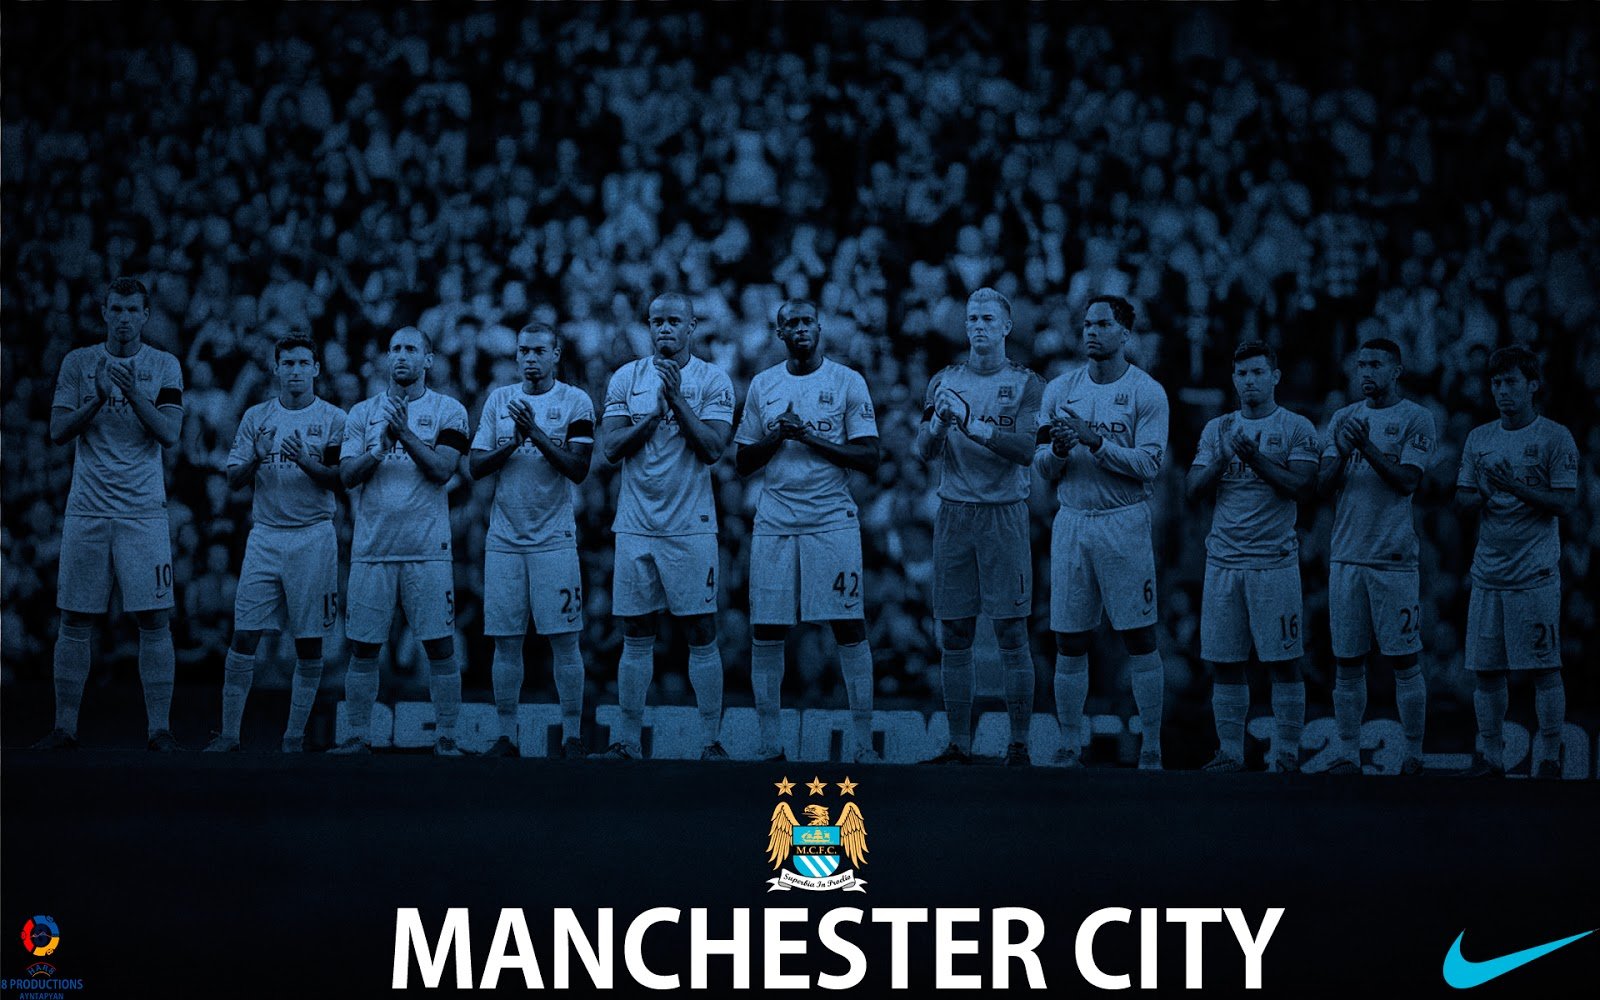 Productions Manchester City 201314 wallpaper 1600x1000